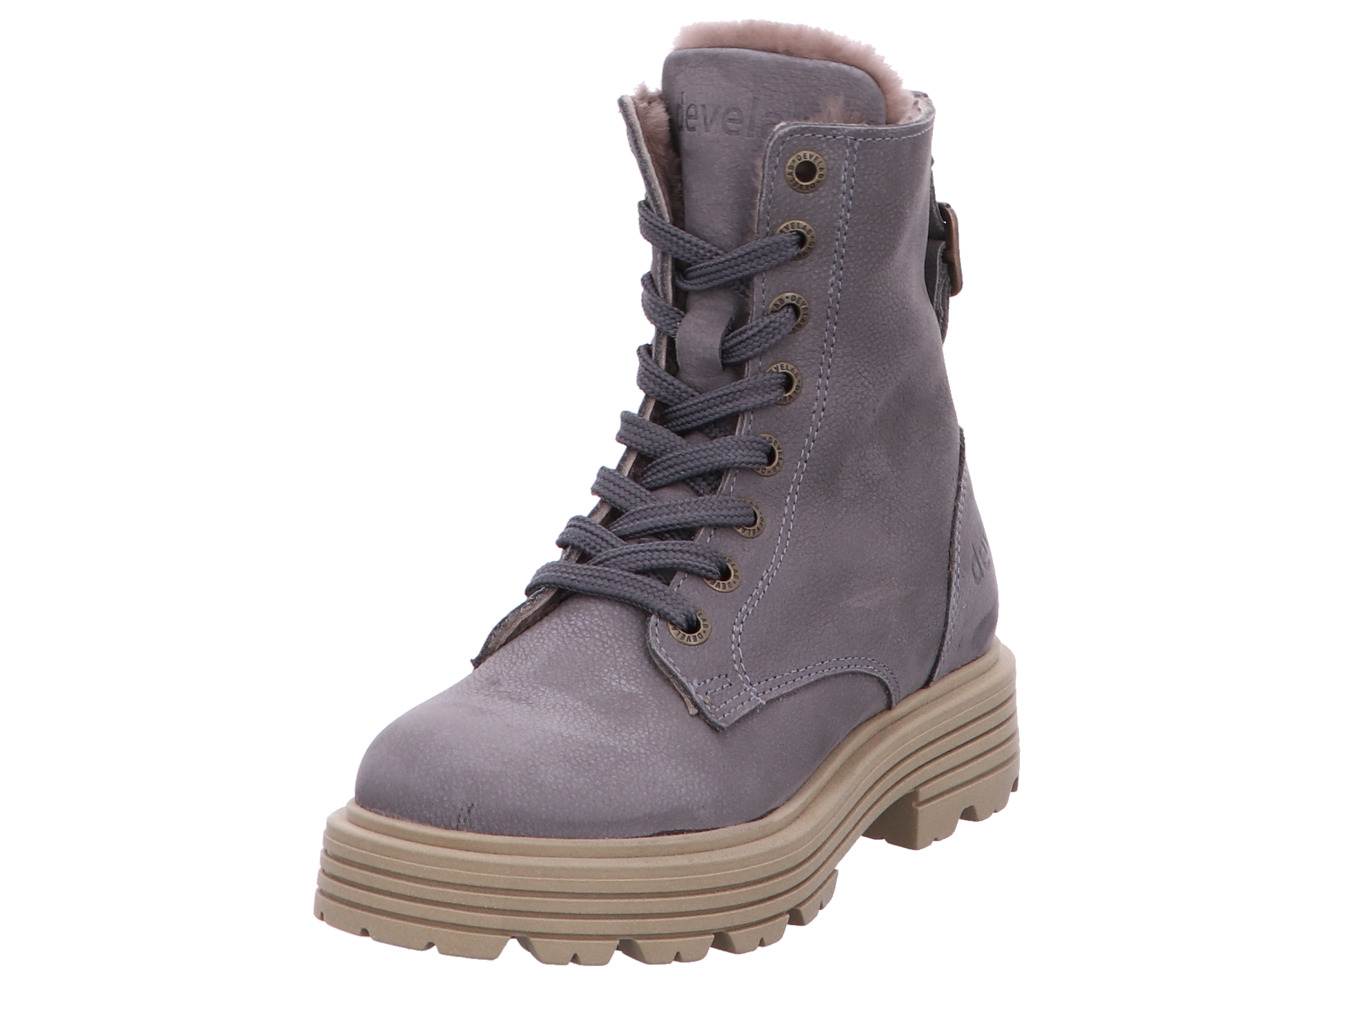 develab_girls_mid_boot_laces_42848_824_1157